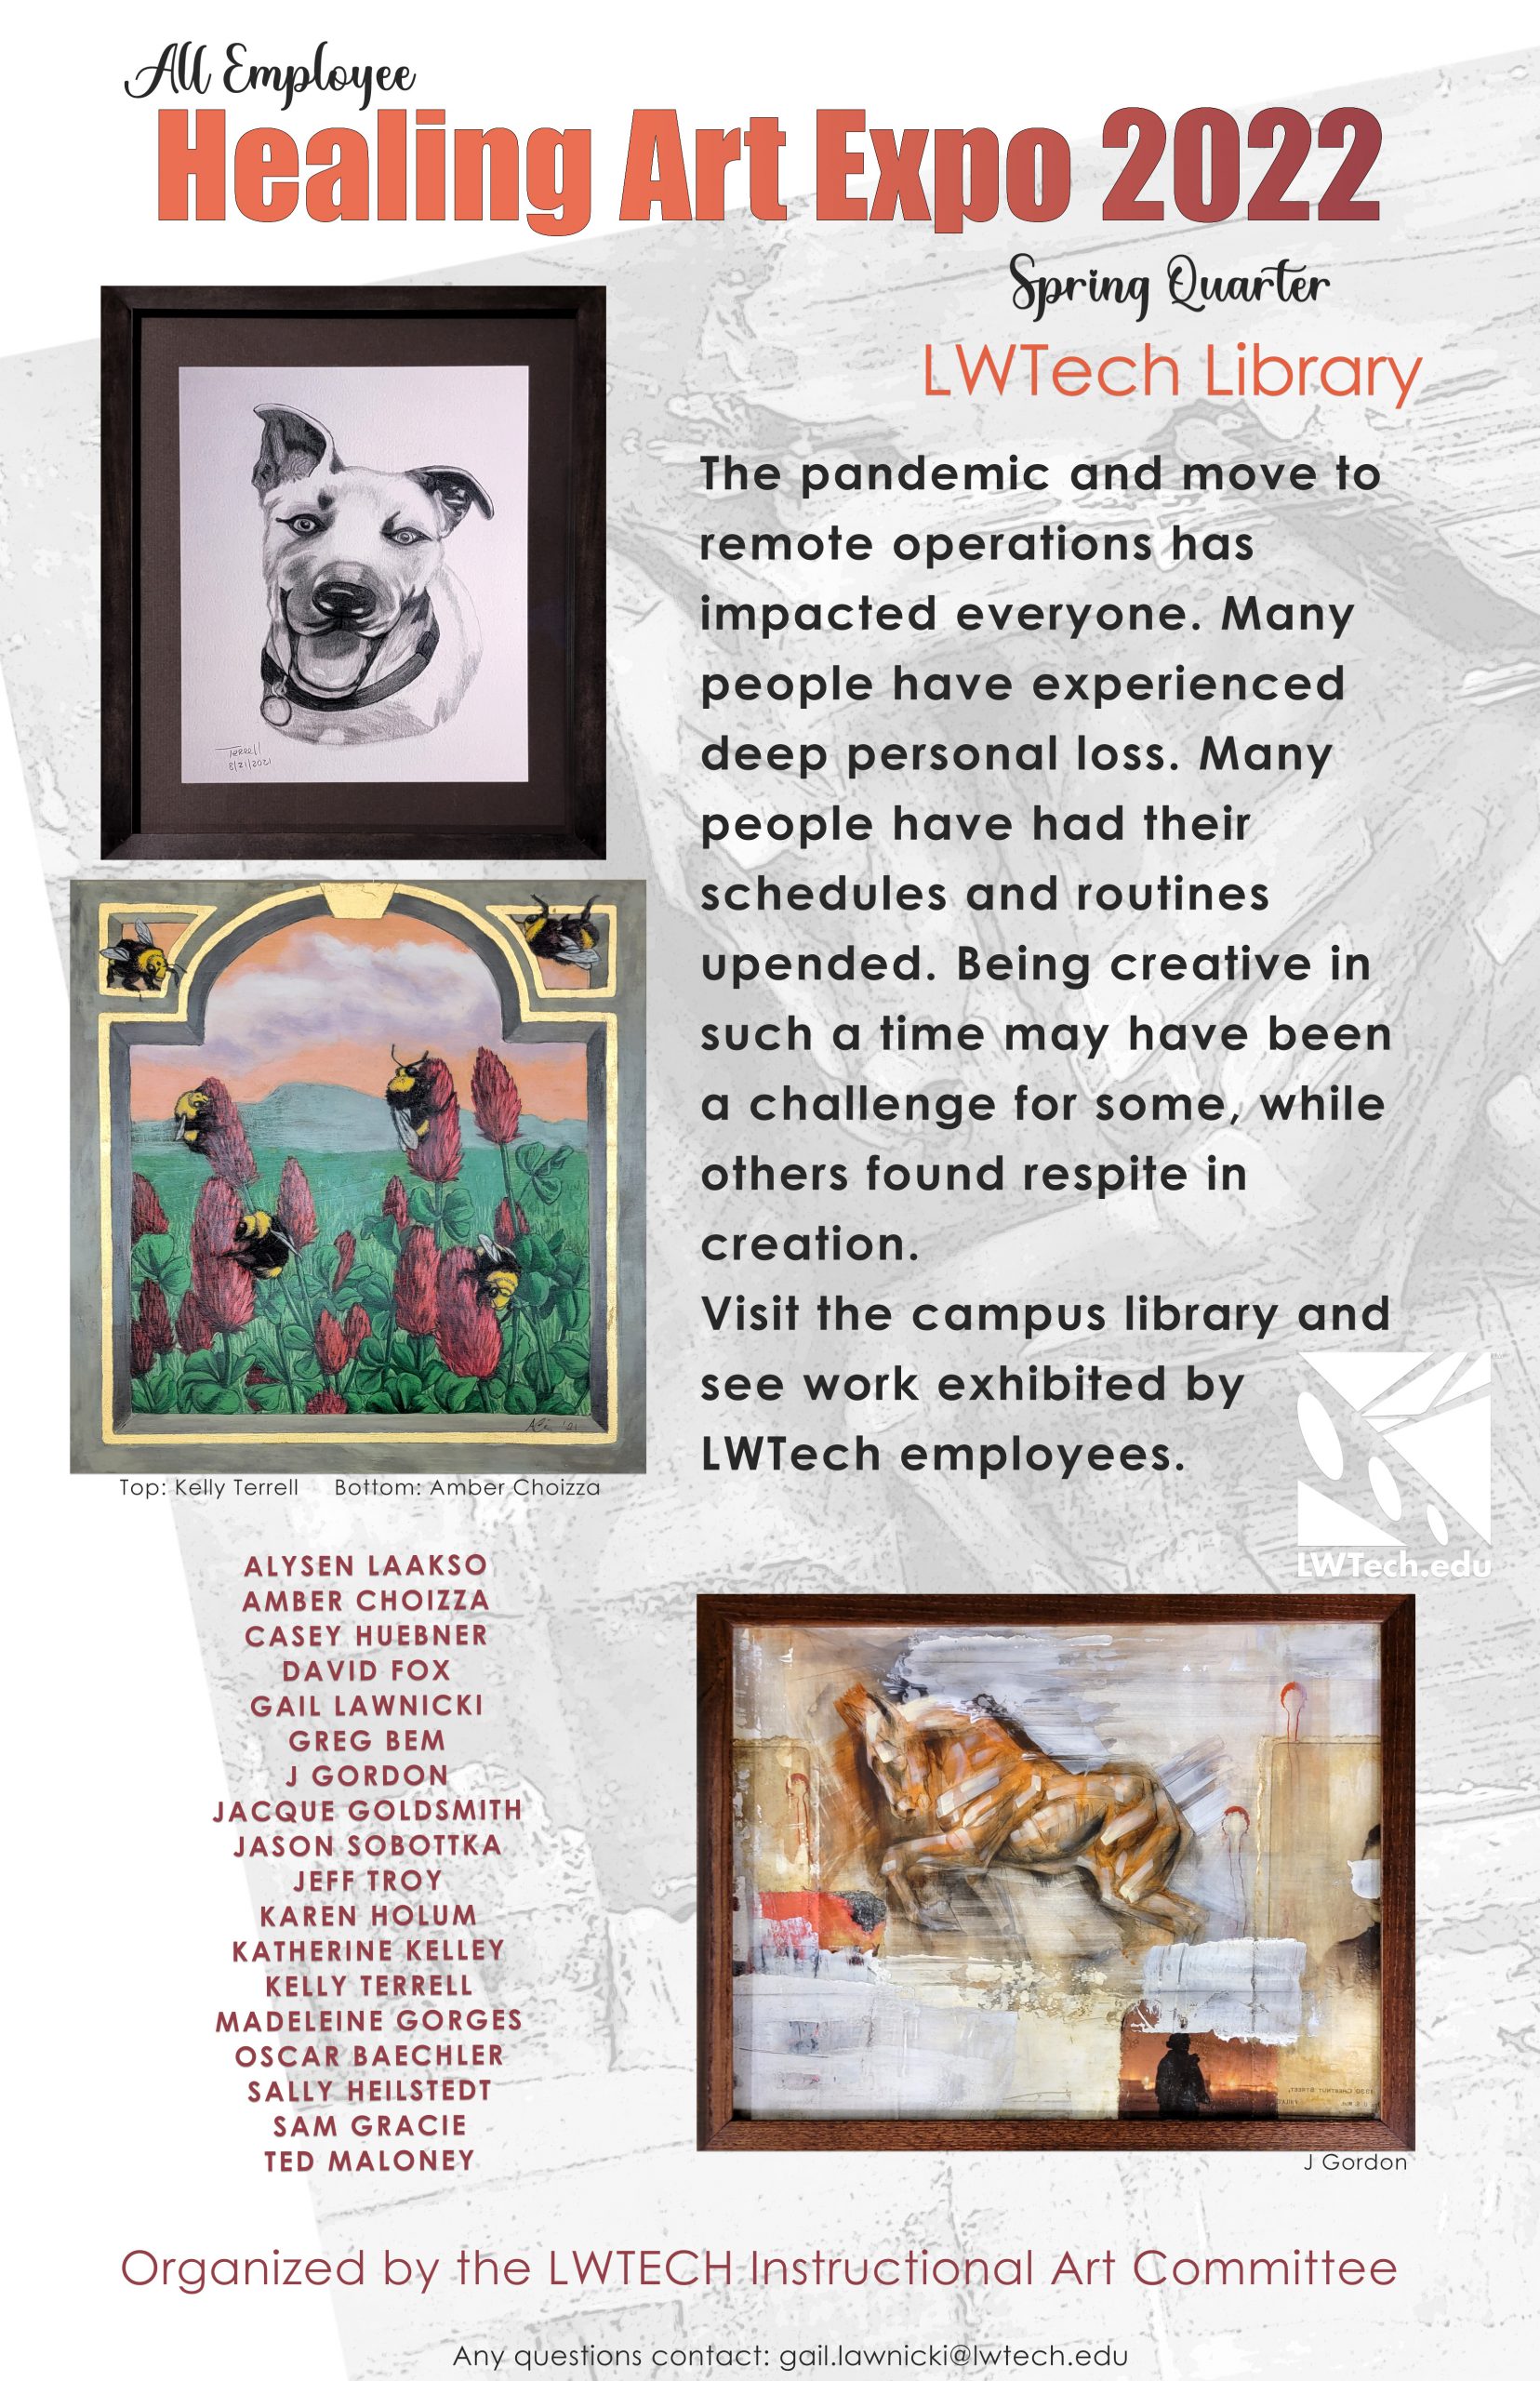 A flier of the art show with text and images about the show